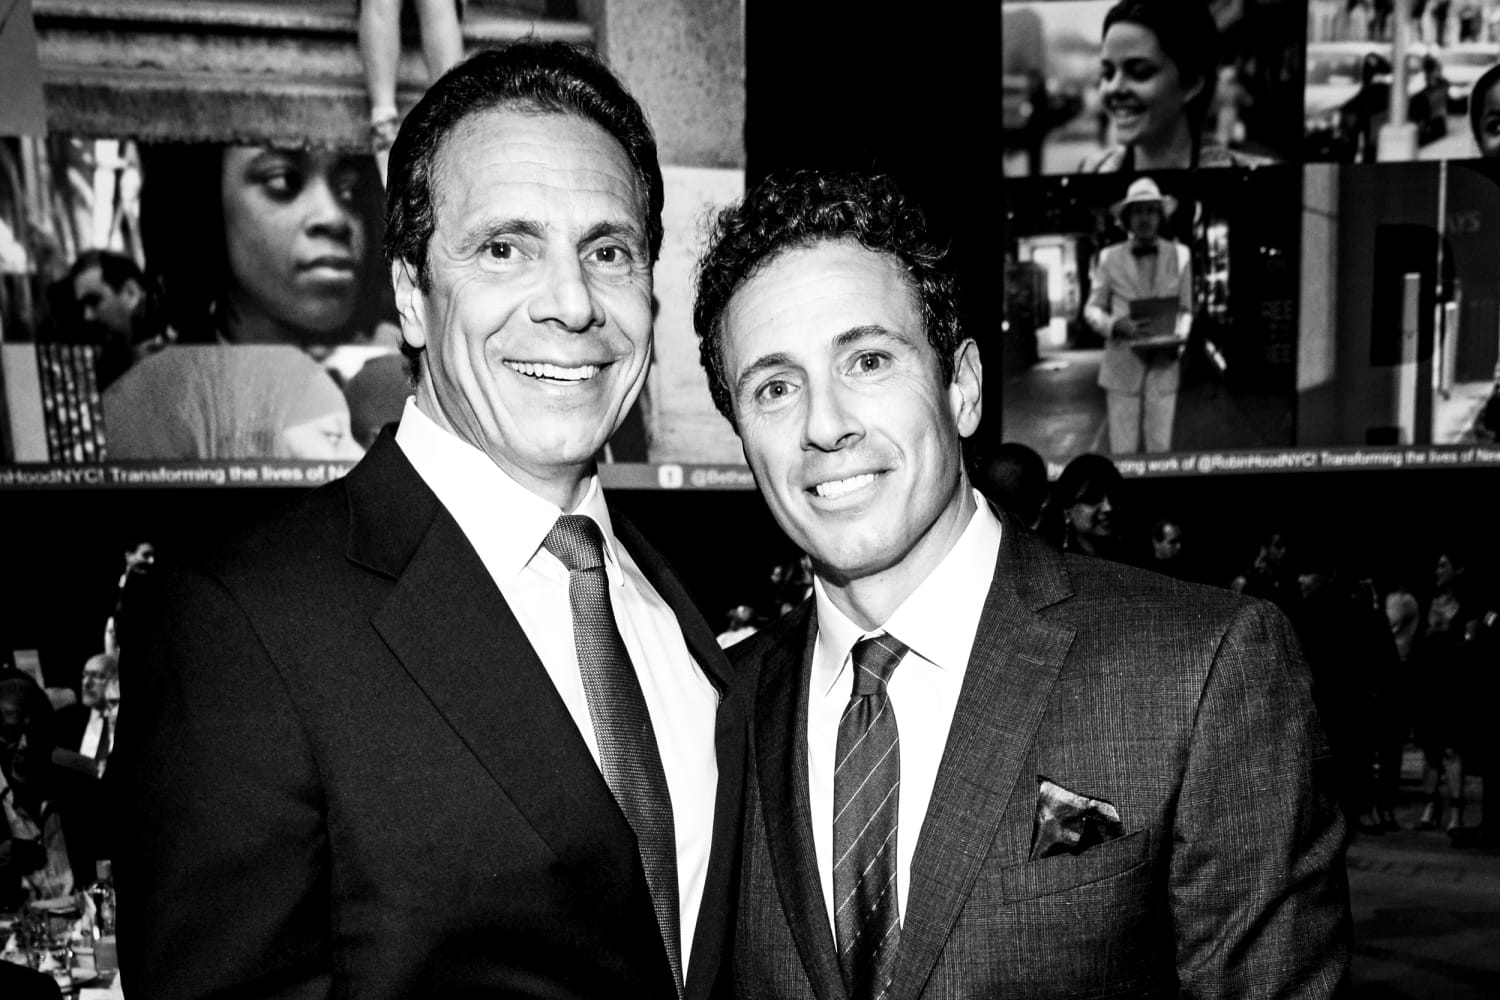 More details revealed about Chris Cuomo’s role as  advisor to brother, former governor